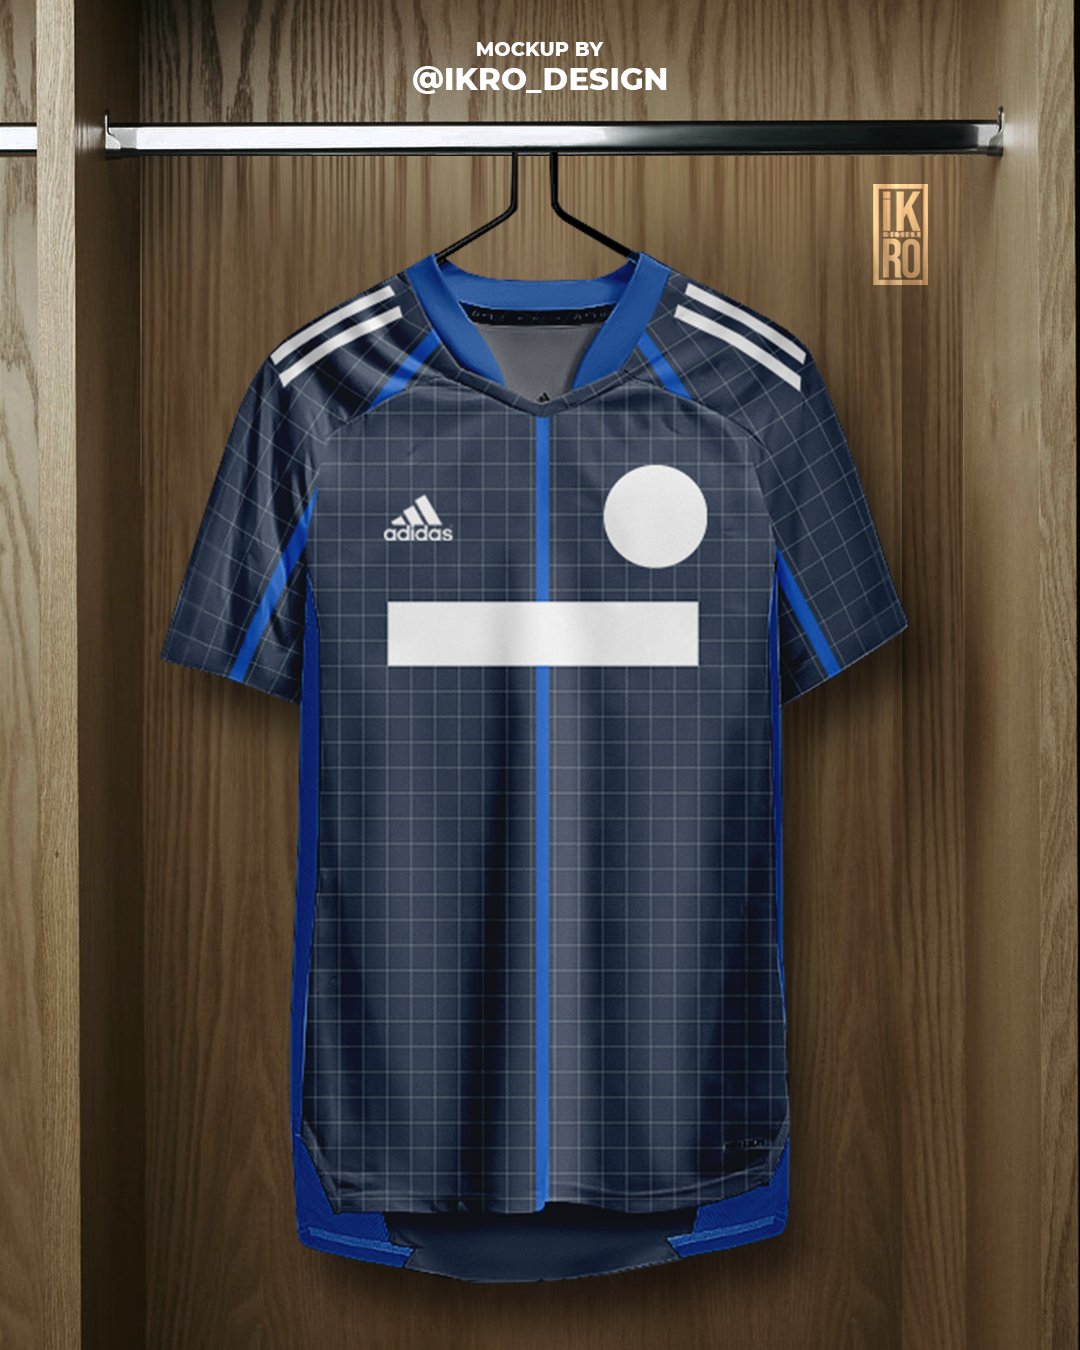 IK-RO DESIGN on Twitter: "New Free Mockup Adidas Condivo 2022 By @ikro_design - Please Guys Like ❤️ and RT to motivate me to post new mockups - https://t.co/5MIBxNqznV - SC Internacional